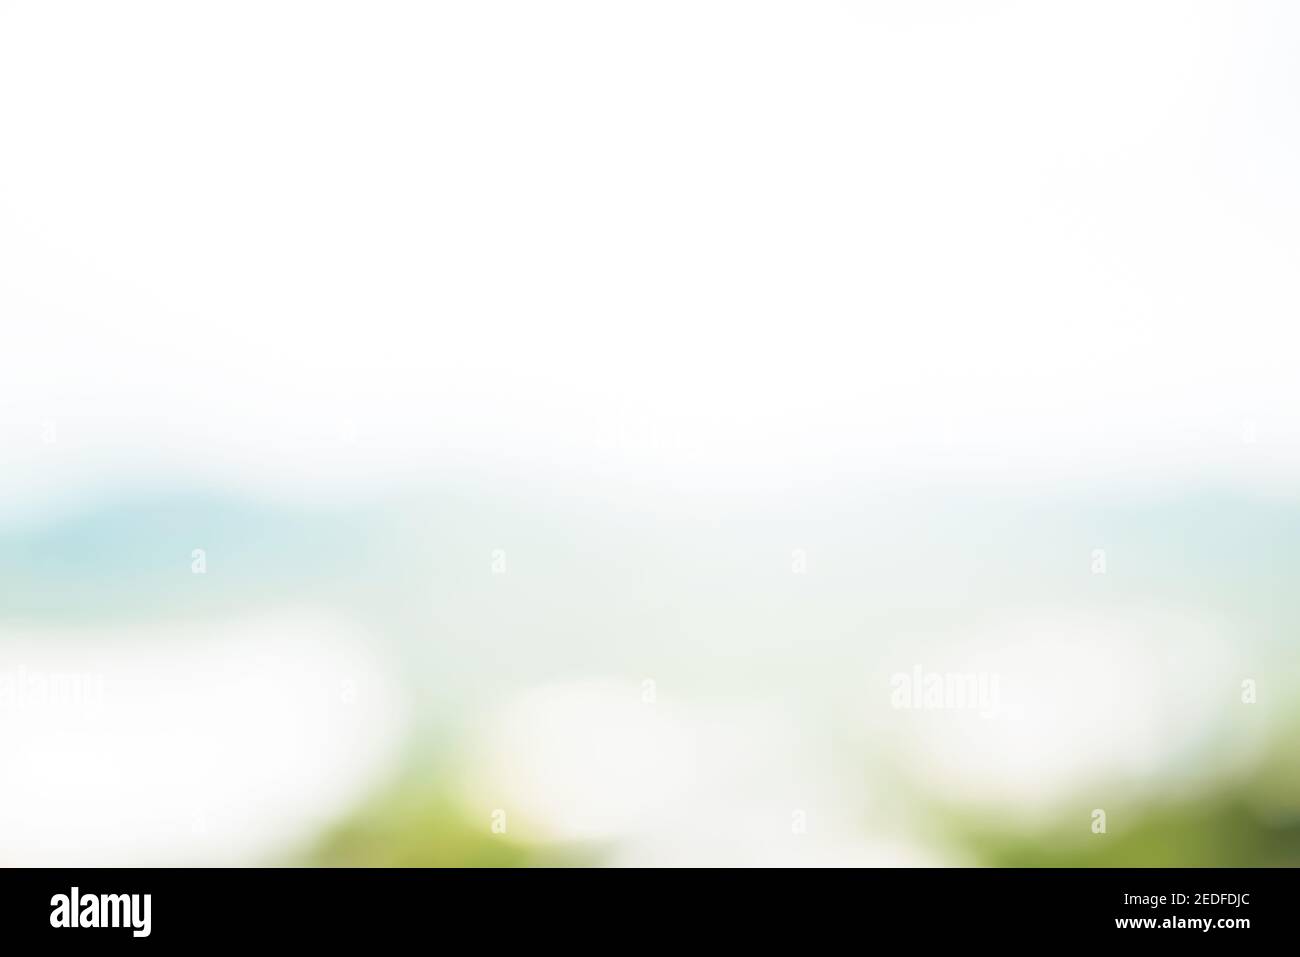 Abstract simple clean natural blur white green bokeh background with light blue shade Stock Photo